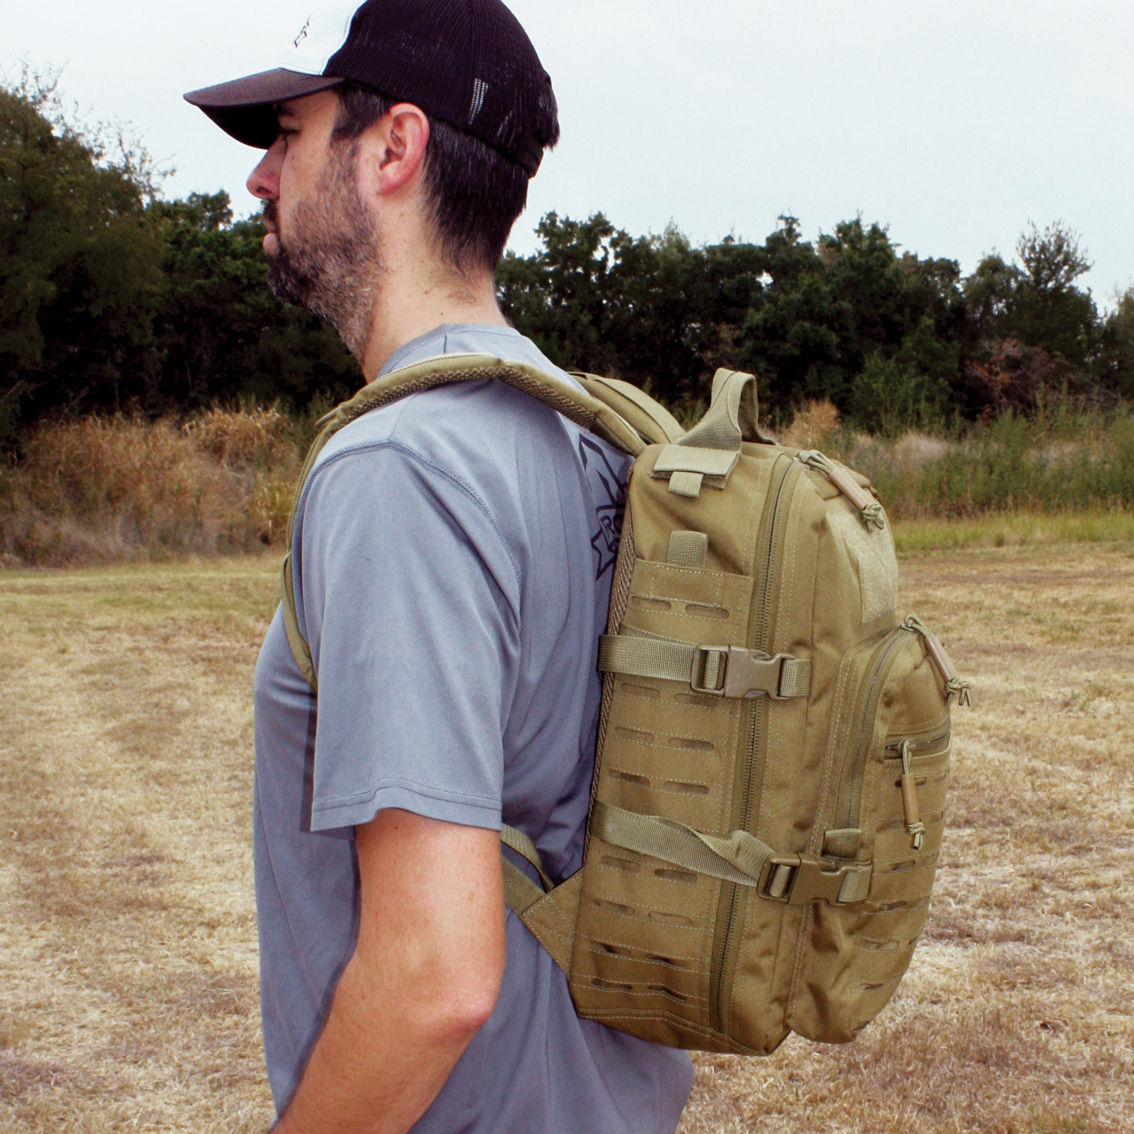 Red Rock Outdoor Gear Transporter Day Pack - Image 8 of 9